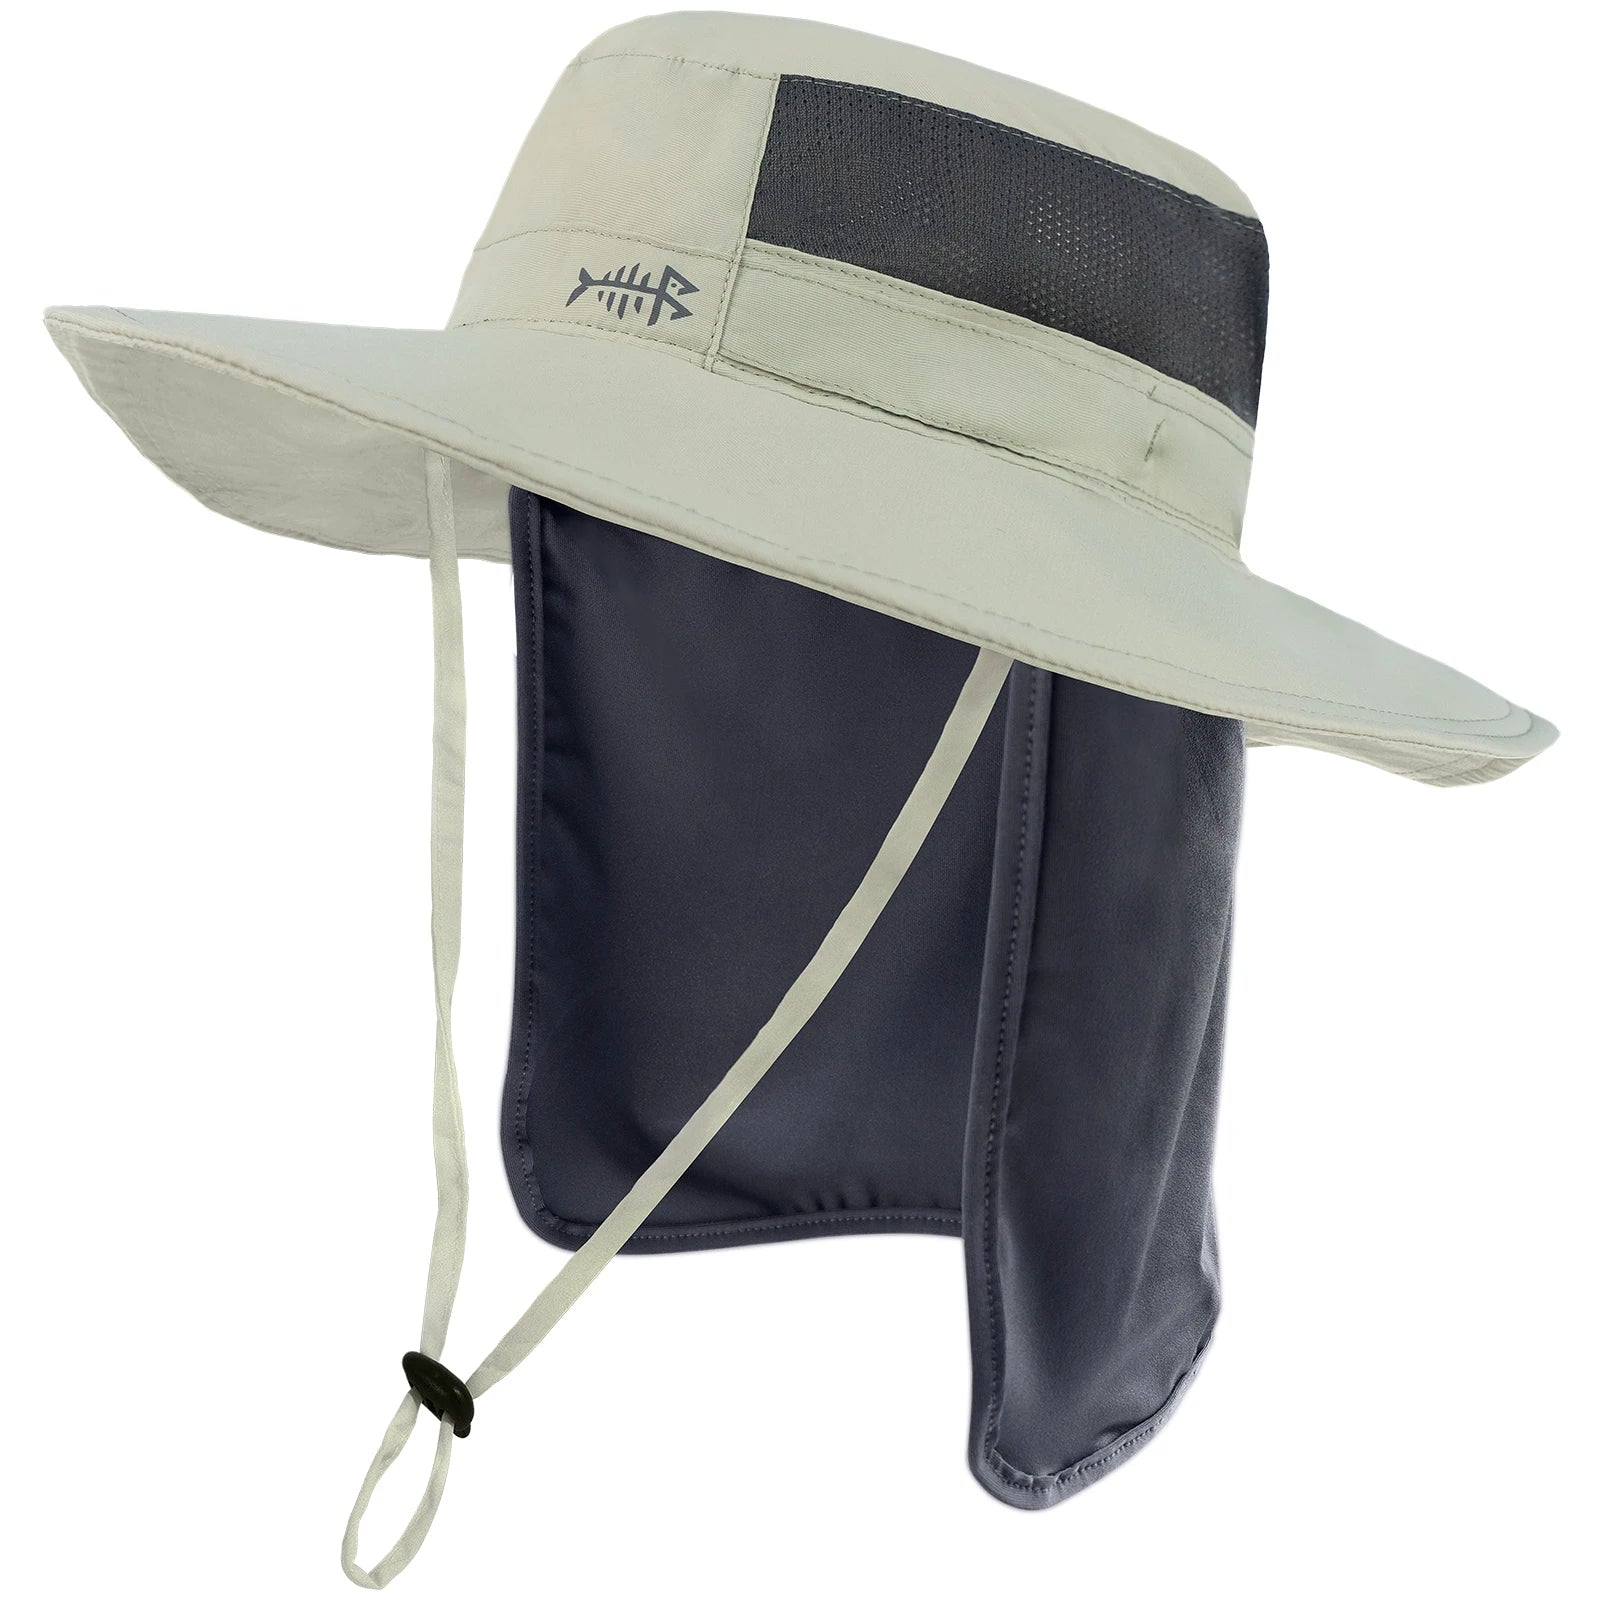 Beige bucket hat used for fishing, it has a flap on the back to protect your neck and ears from the sun. It also has a chin strap for windy days or while riding in a boat.